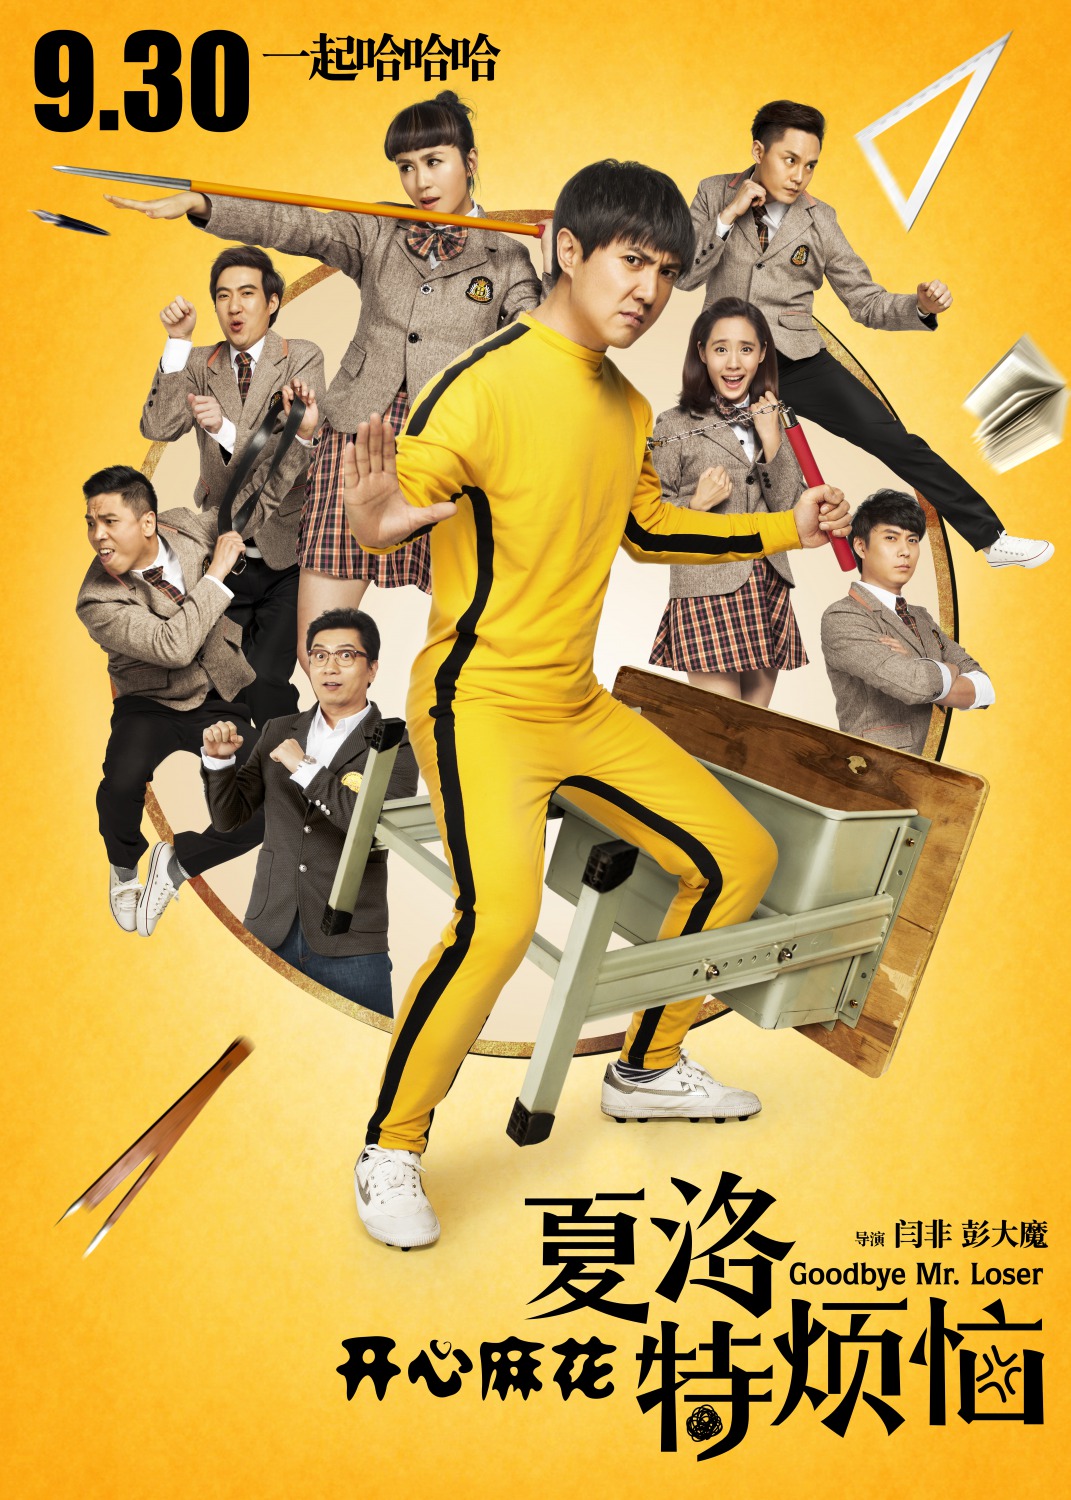 Extra Large Movie Poster Image for Xia Luo te fan nao (#4 of 4)